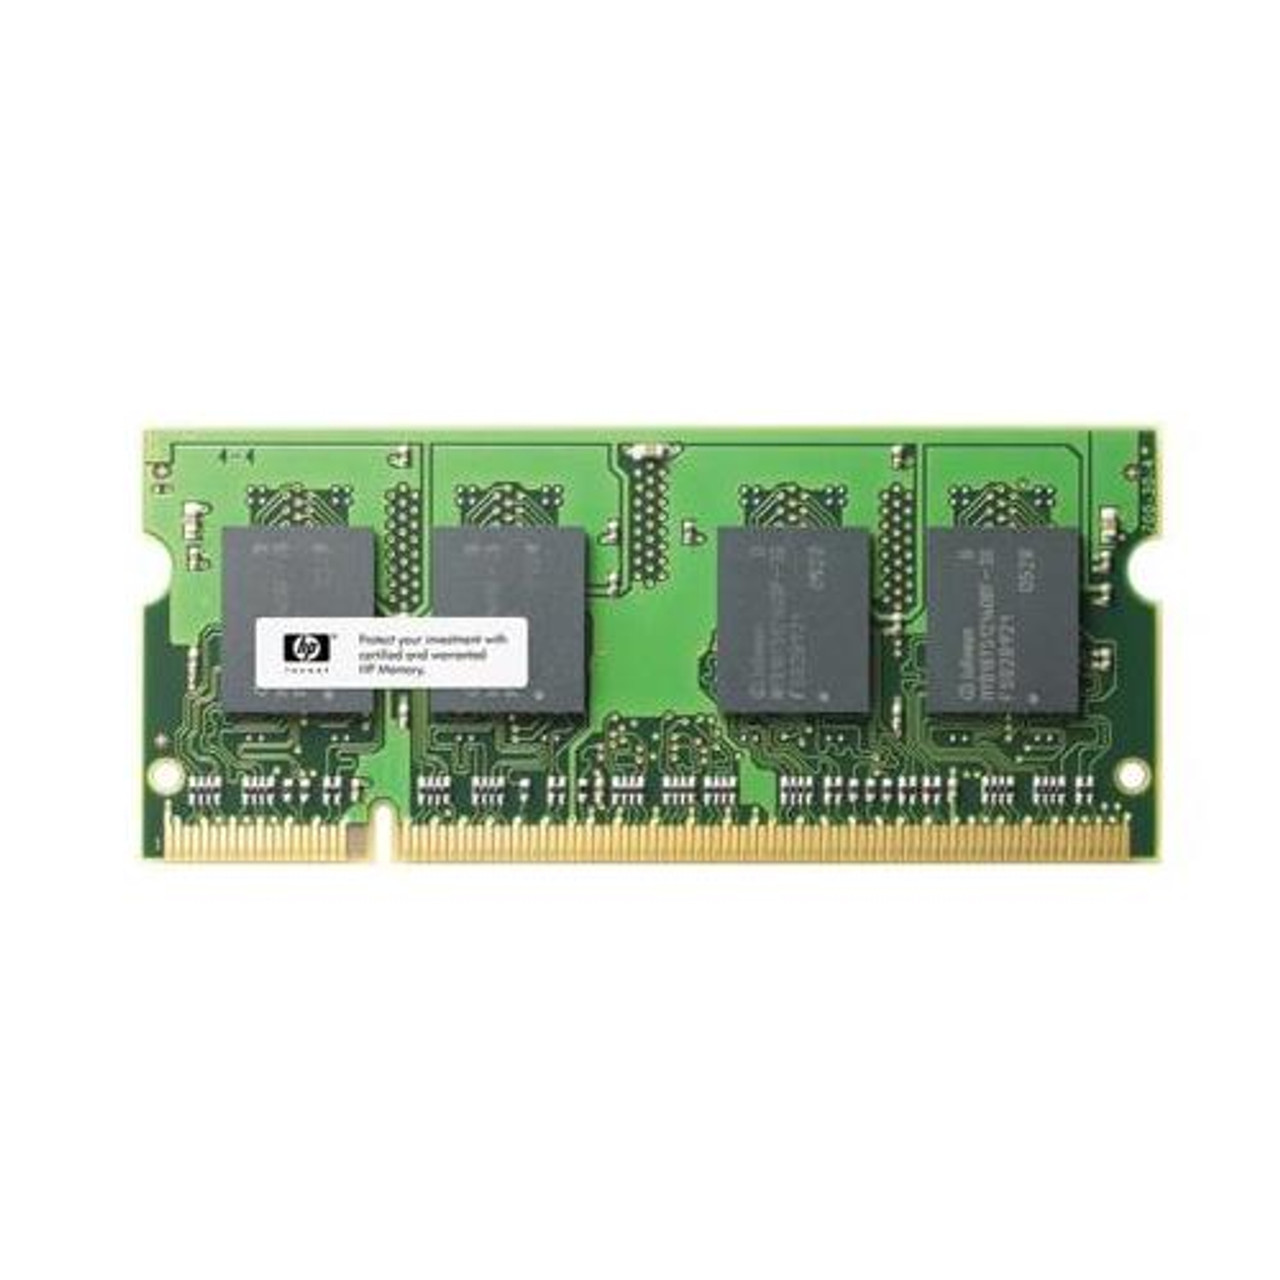 361526-004 Compaq 512MB PC2-4200 DDR2-533MHz non-ECC Unbuffered CL4 200-Pin SoDimm Memory Module for NC6220 Notebook PC